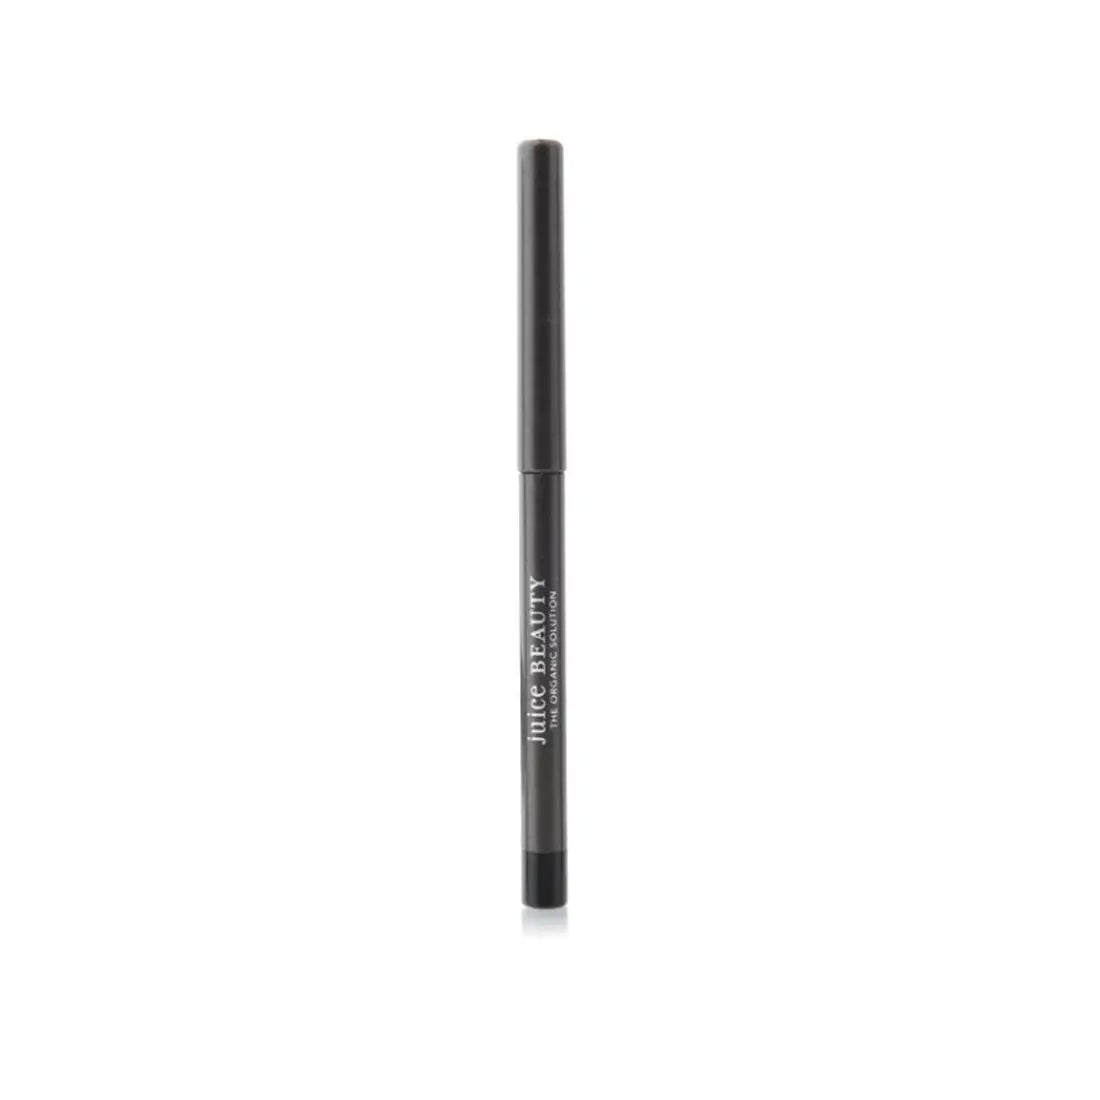 Juice Beauty Phyto-Pigments Precision Eye Pencil ’Brown’ 